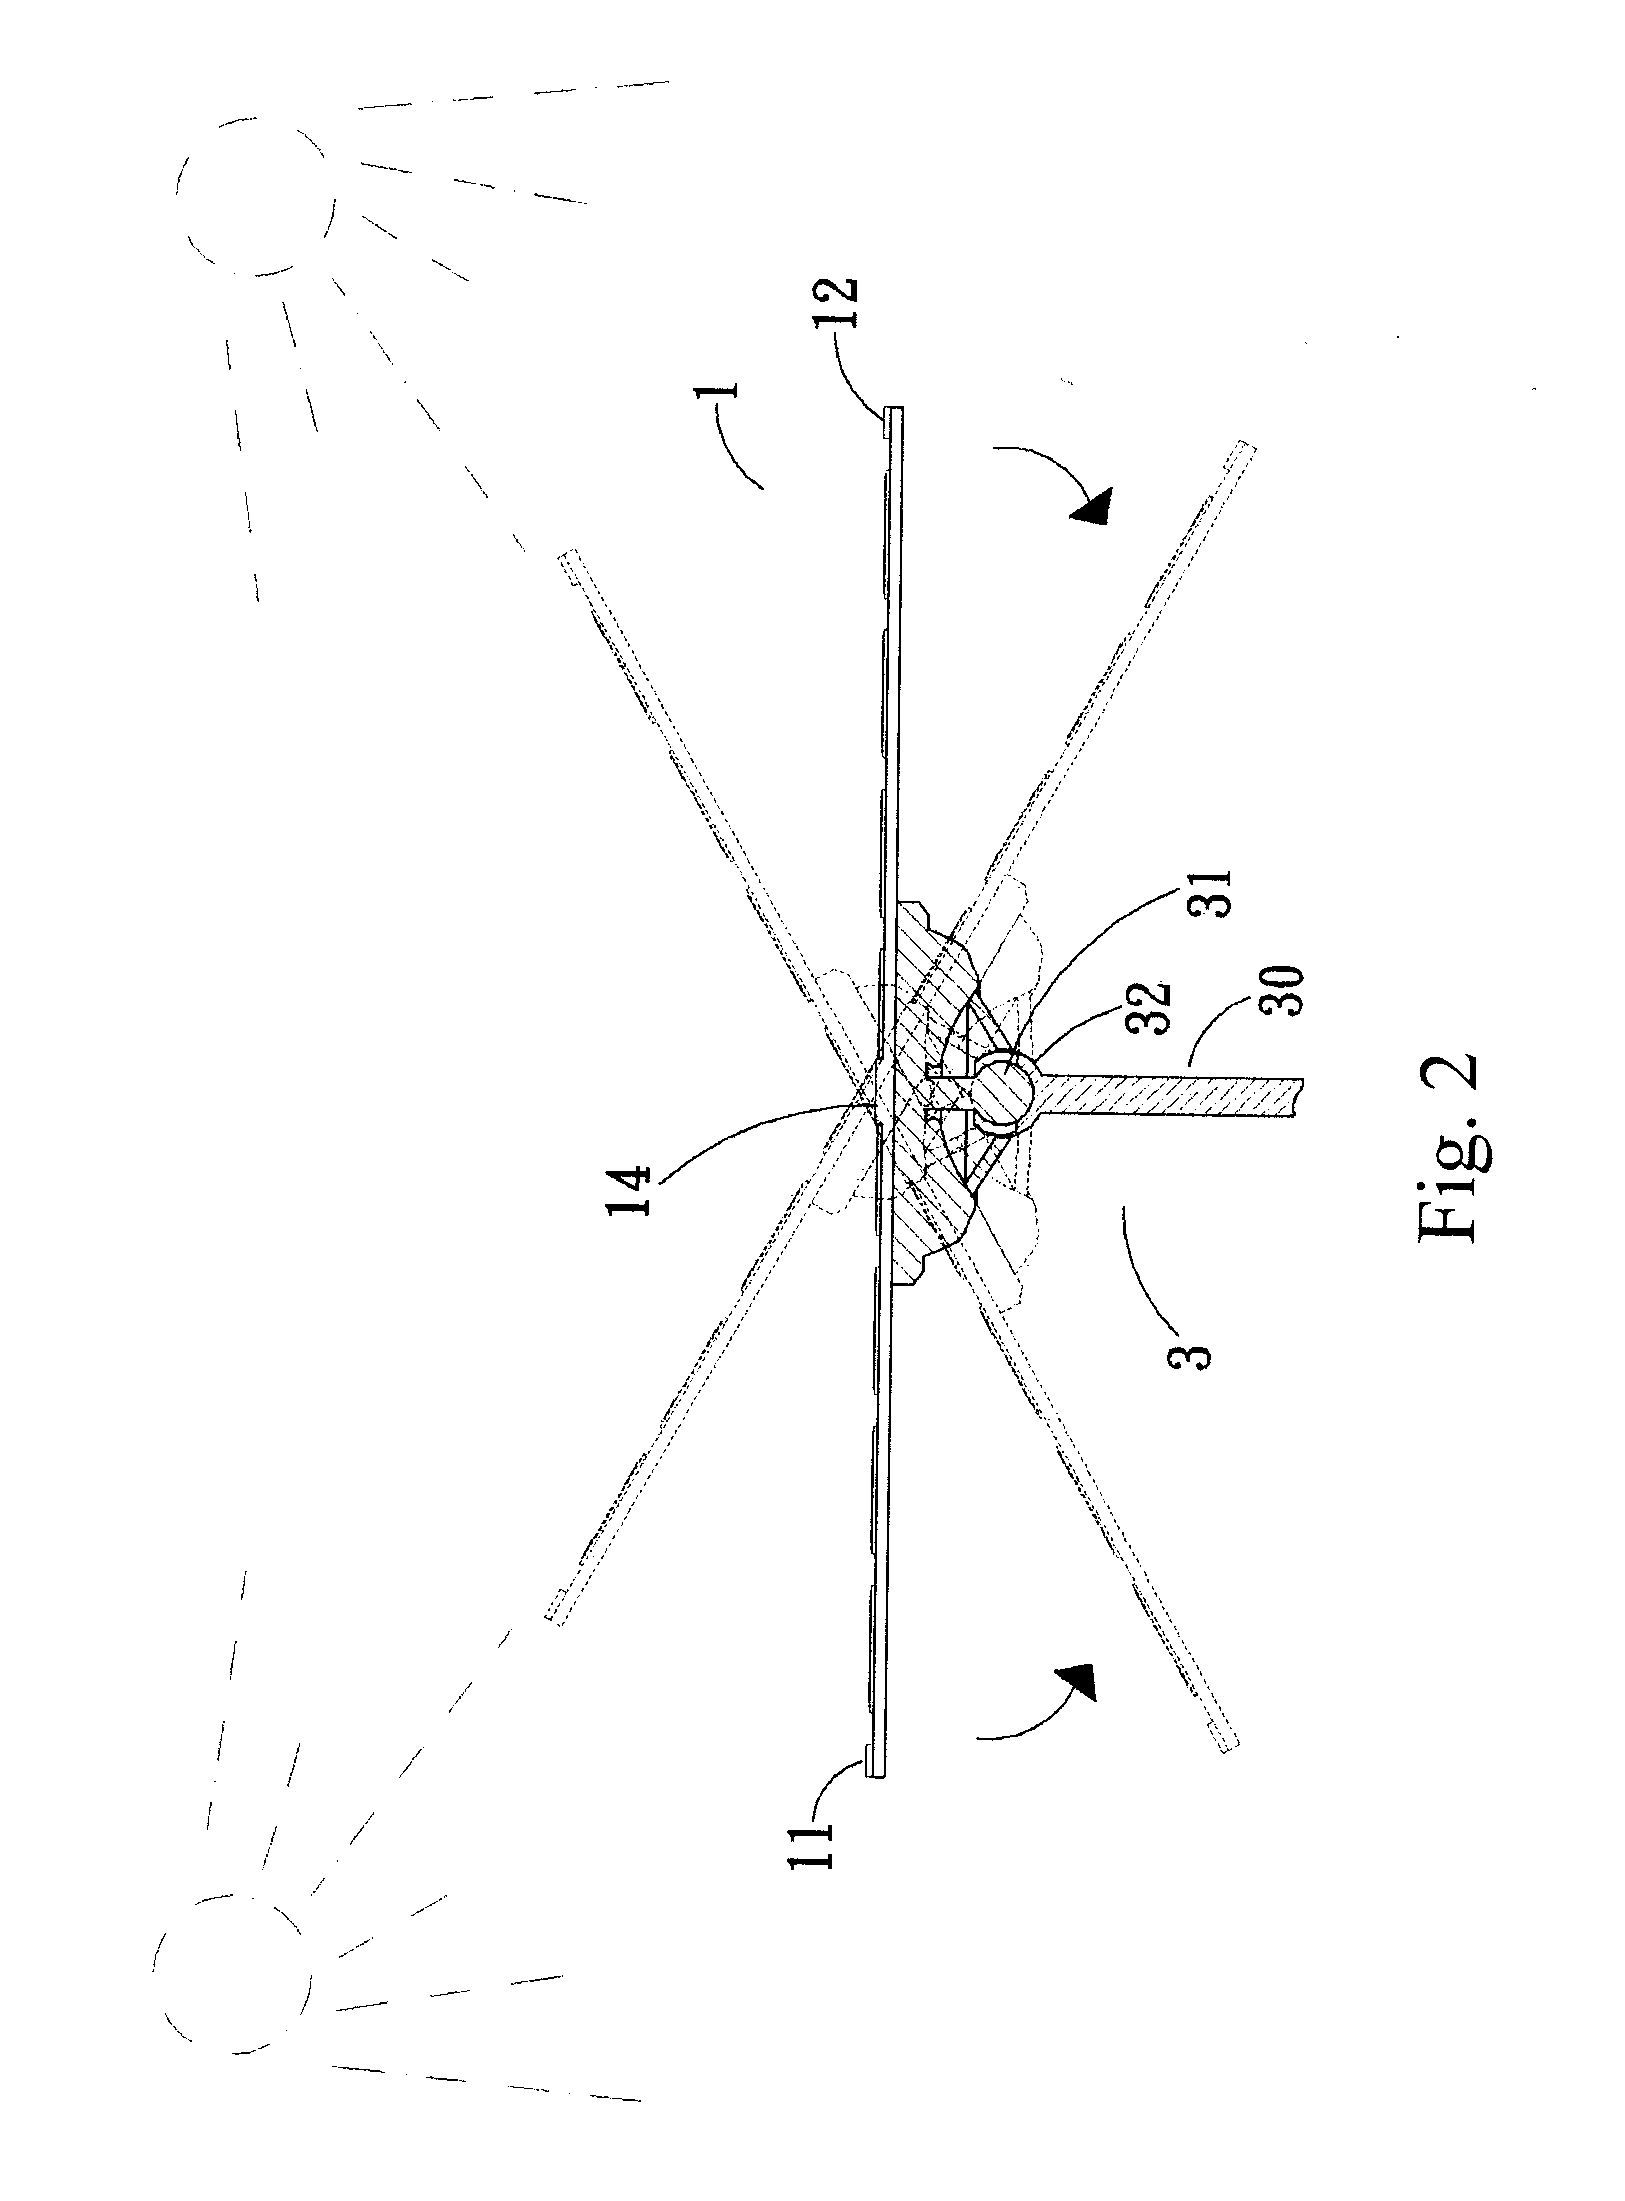 Solar energy absorption plate with angle adjusting assembly